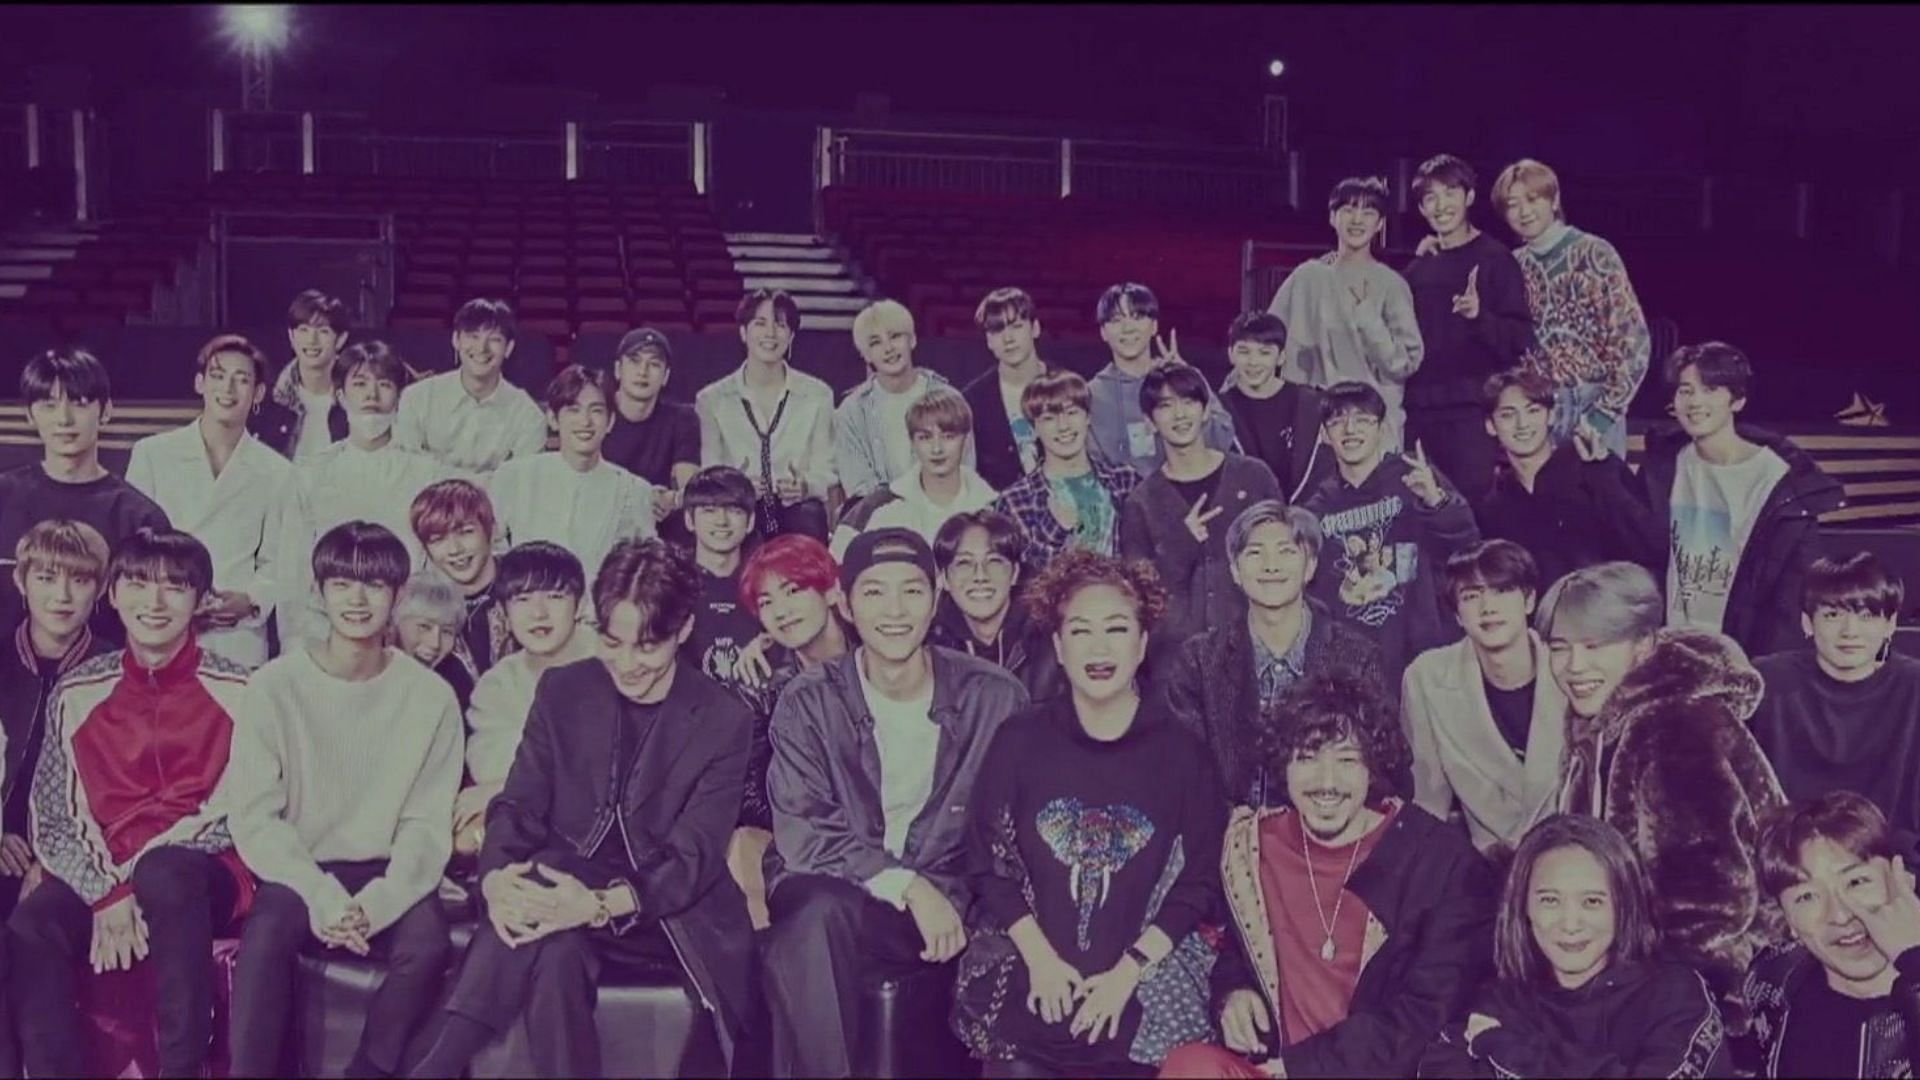 A 2018 MAMA behind picture showing BTS, GOT7, SEVENTEEN, WANNA ONE, Song Joong-ki, Yoon Mi-rae, Tiger JK, and many other celebrities posing for a photo (Image via Mnet)